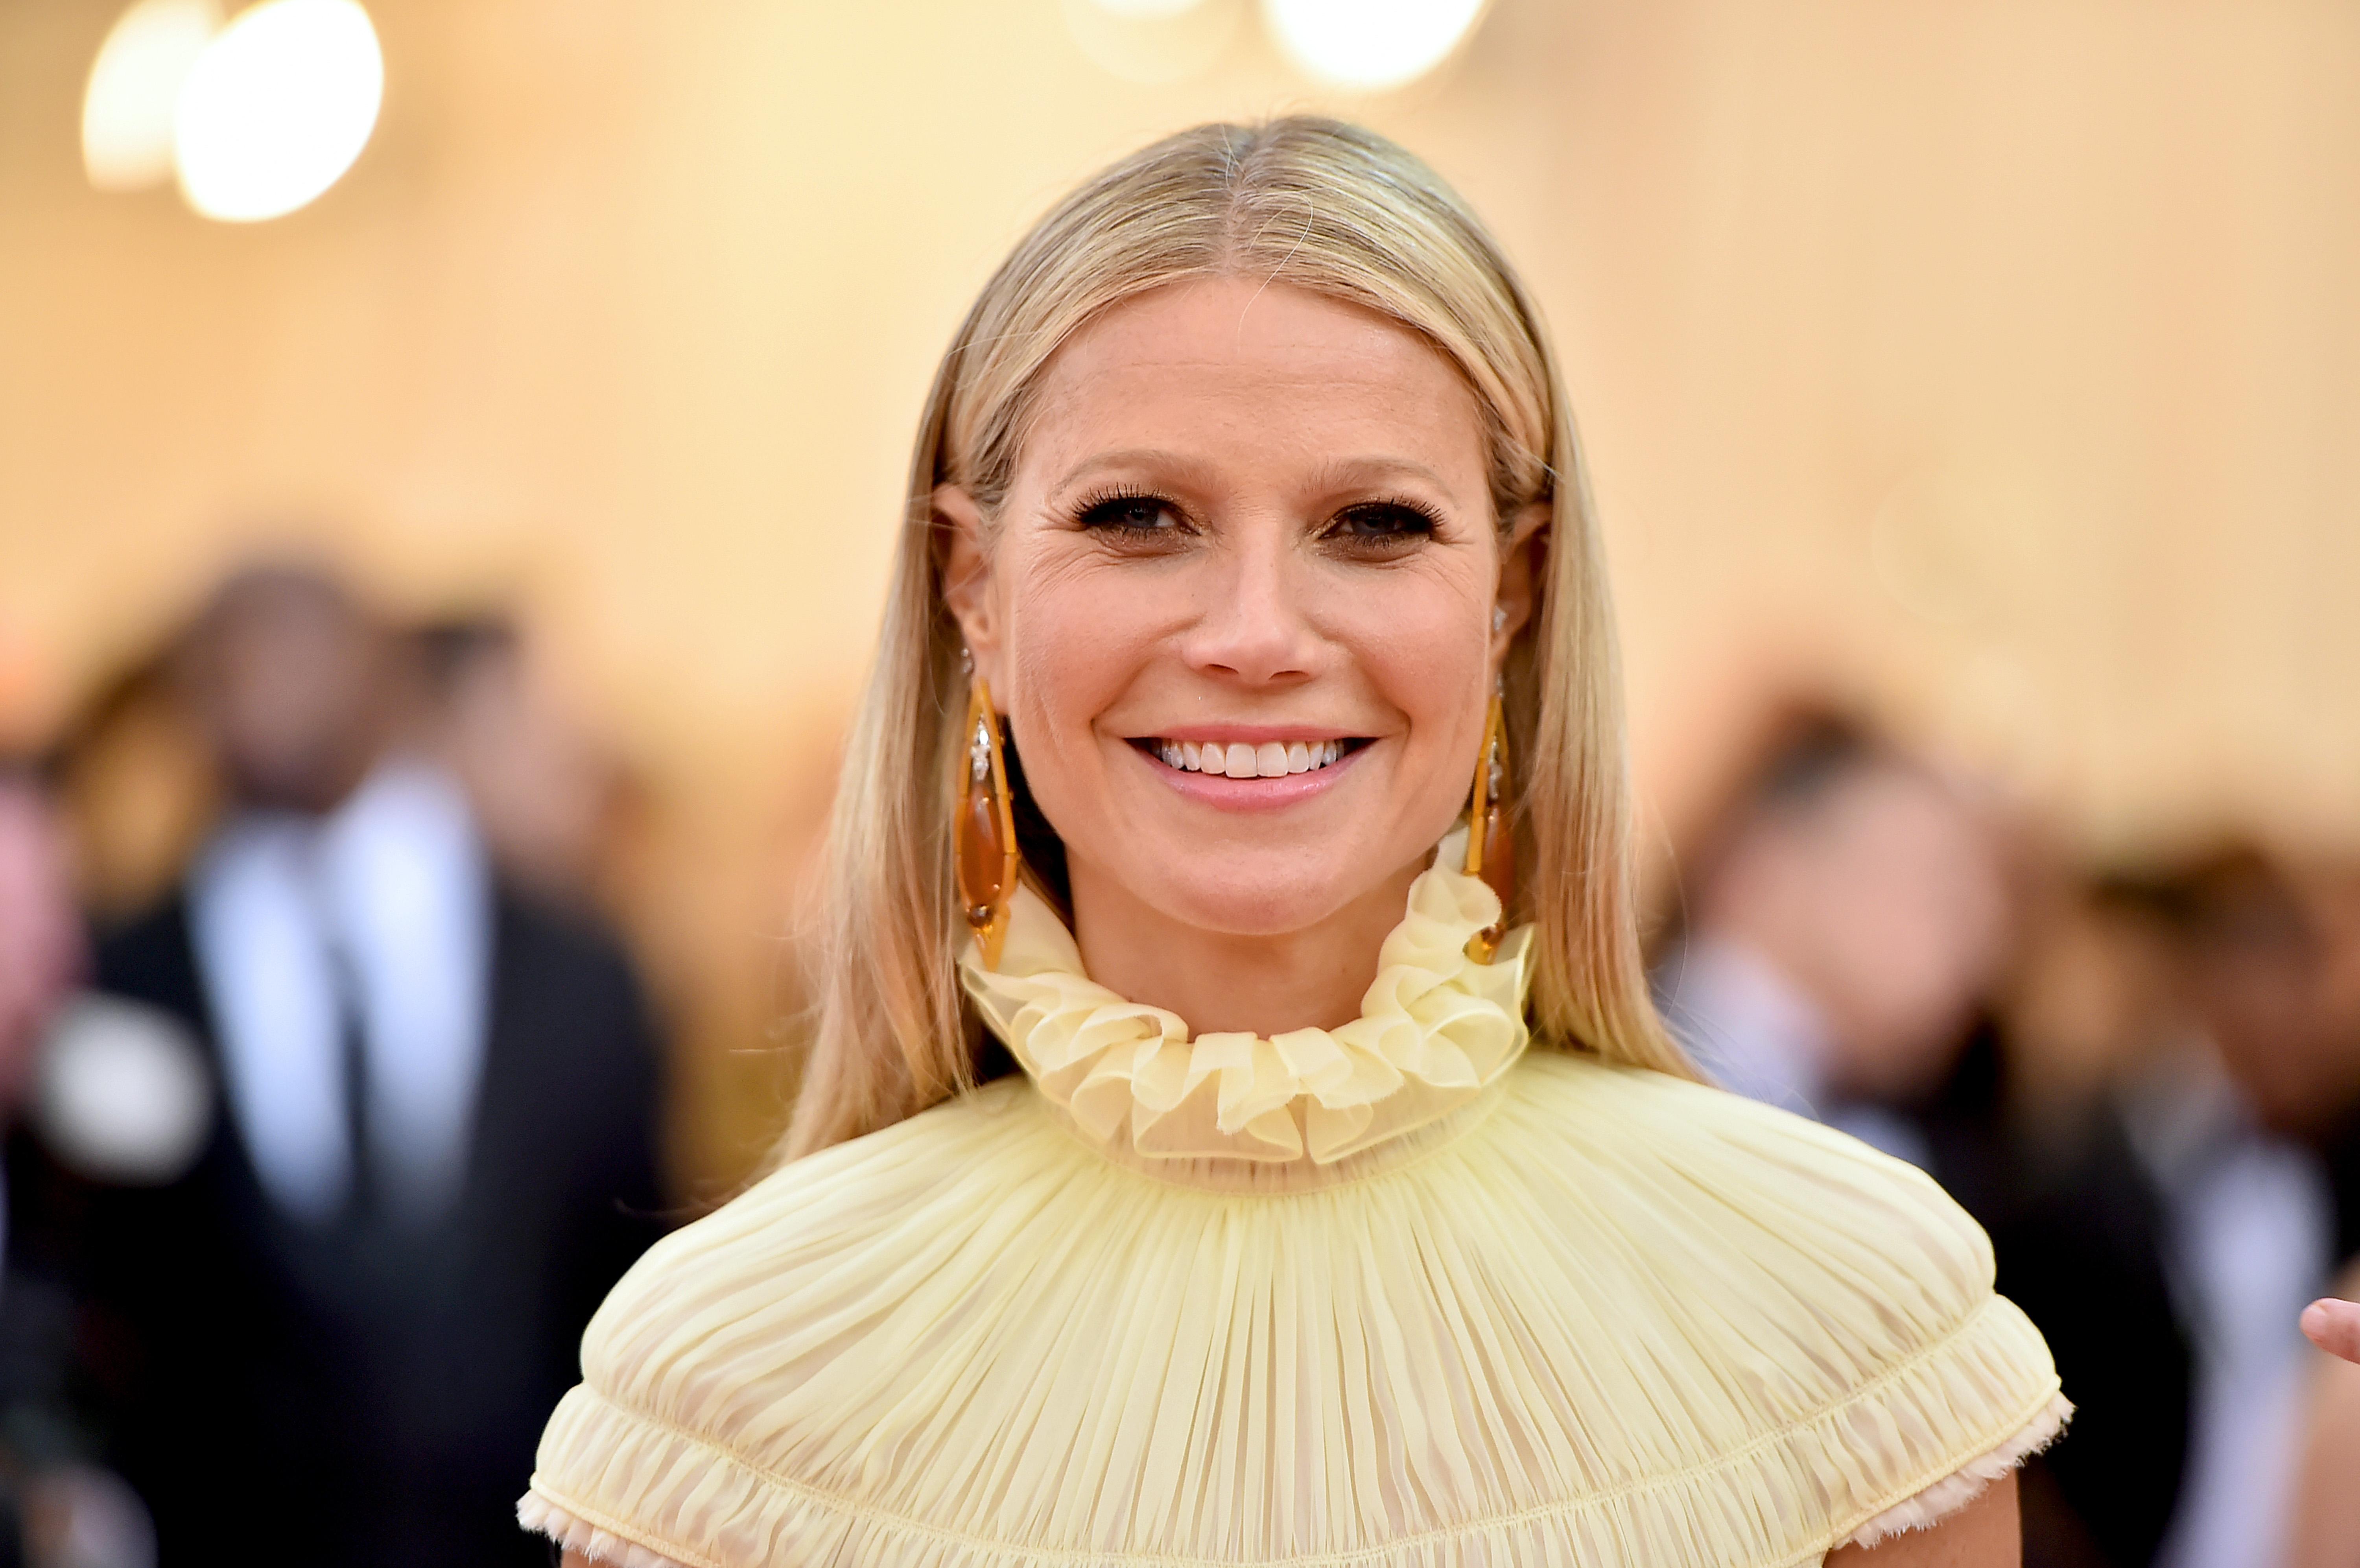 Why so Much Outrage About Gwyneth Paltrow’s Show ‘The Goop Lab’ And Why Does Everyone Hate Her?